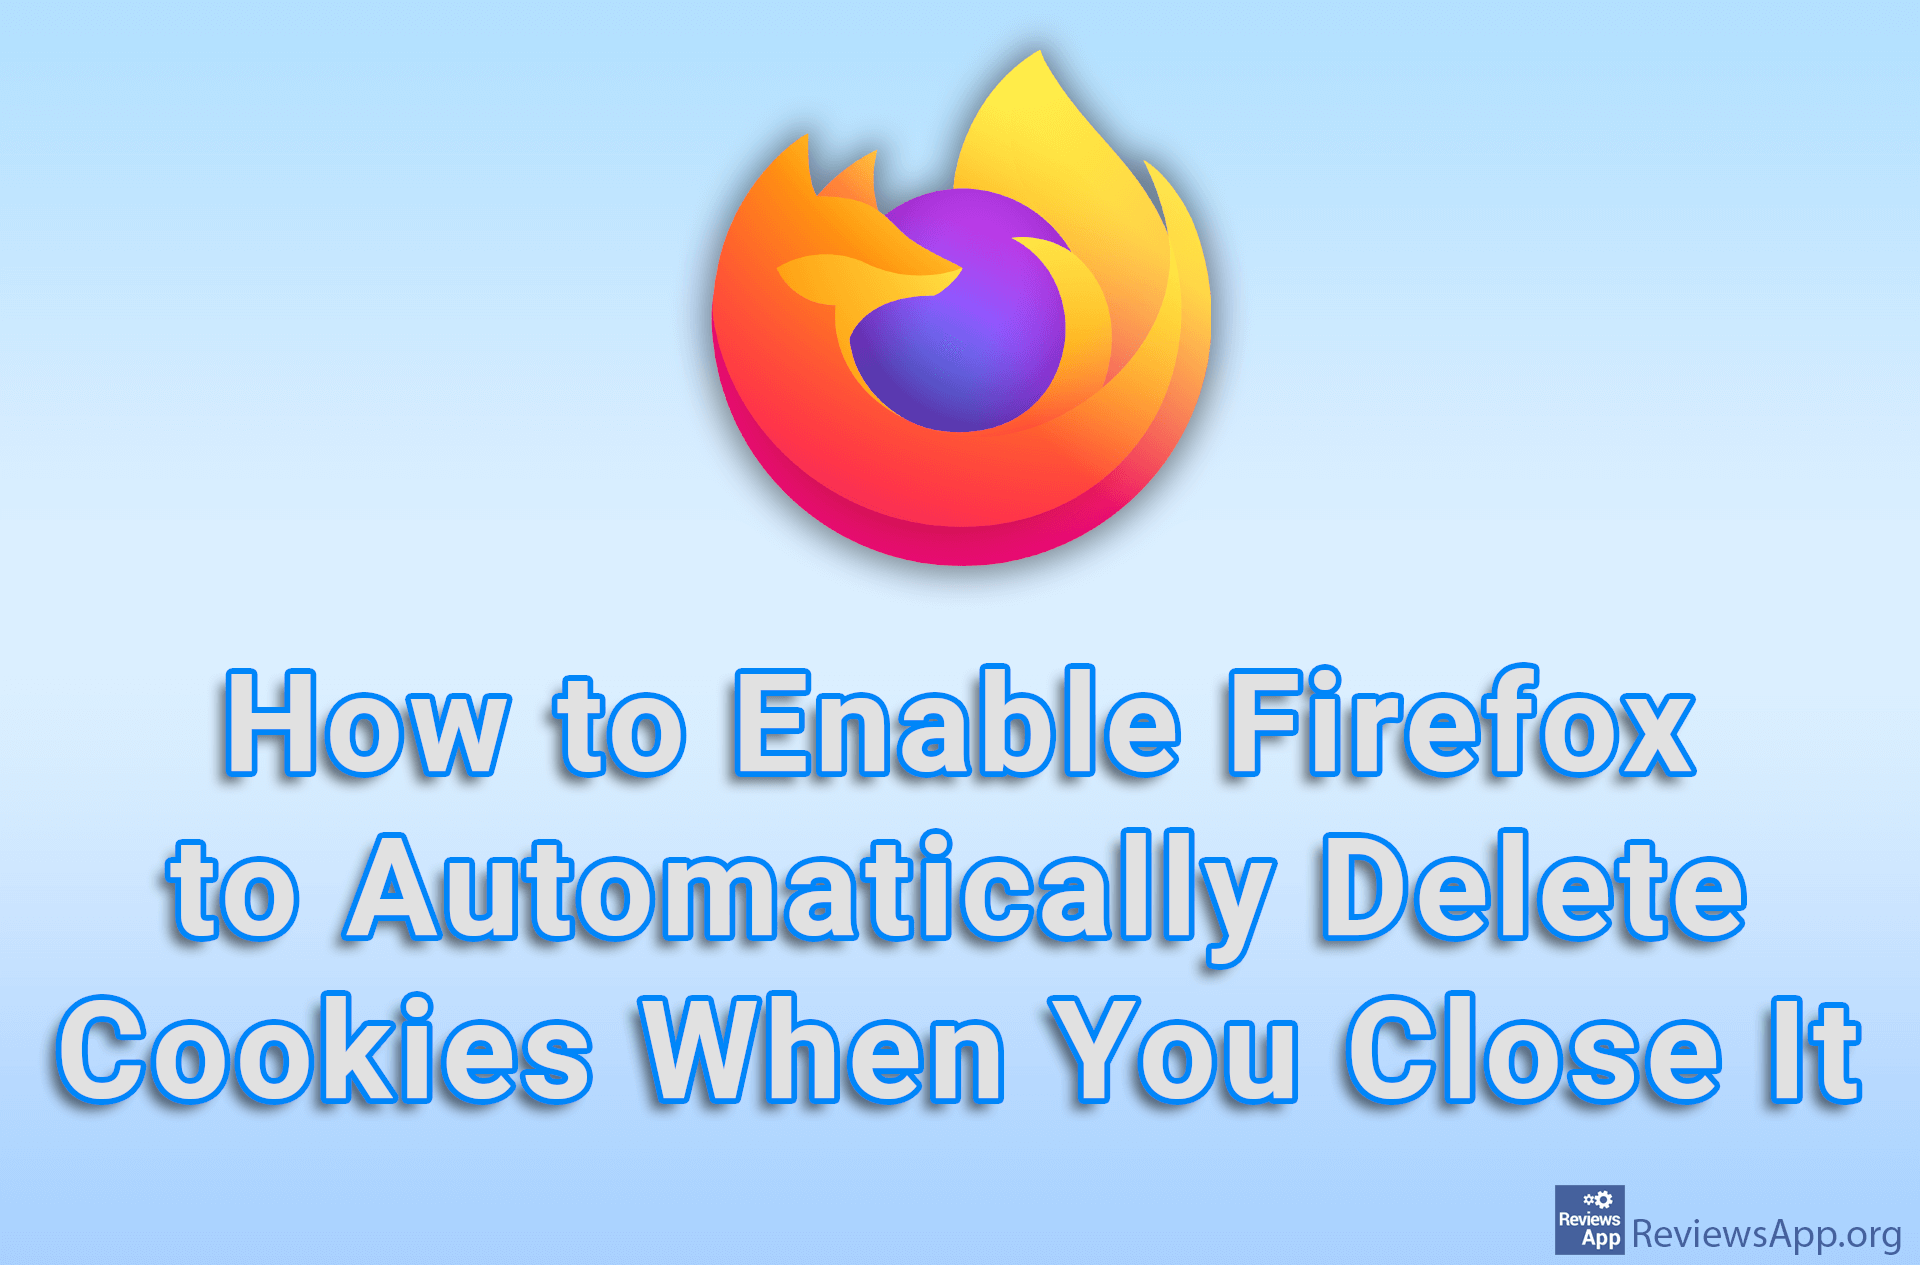 How to Enable Firefox to Automatically Delete Cookies When You Close It